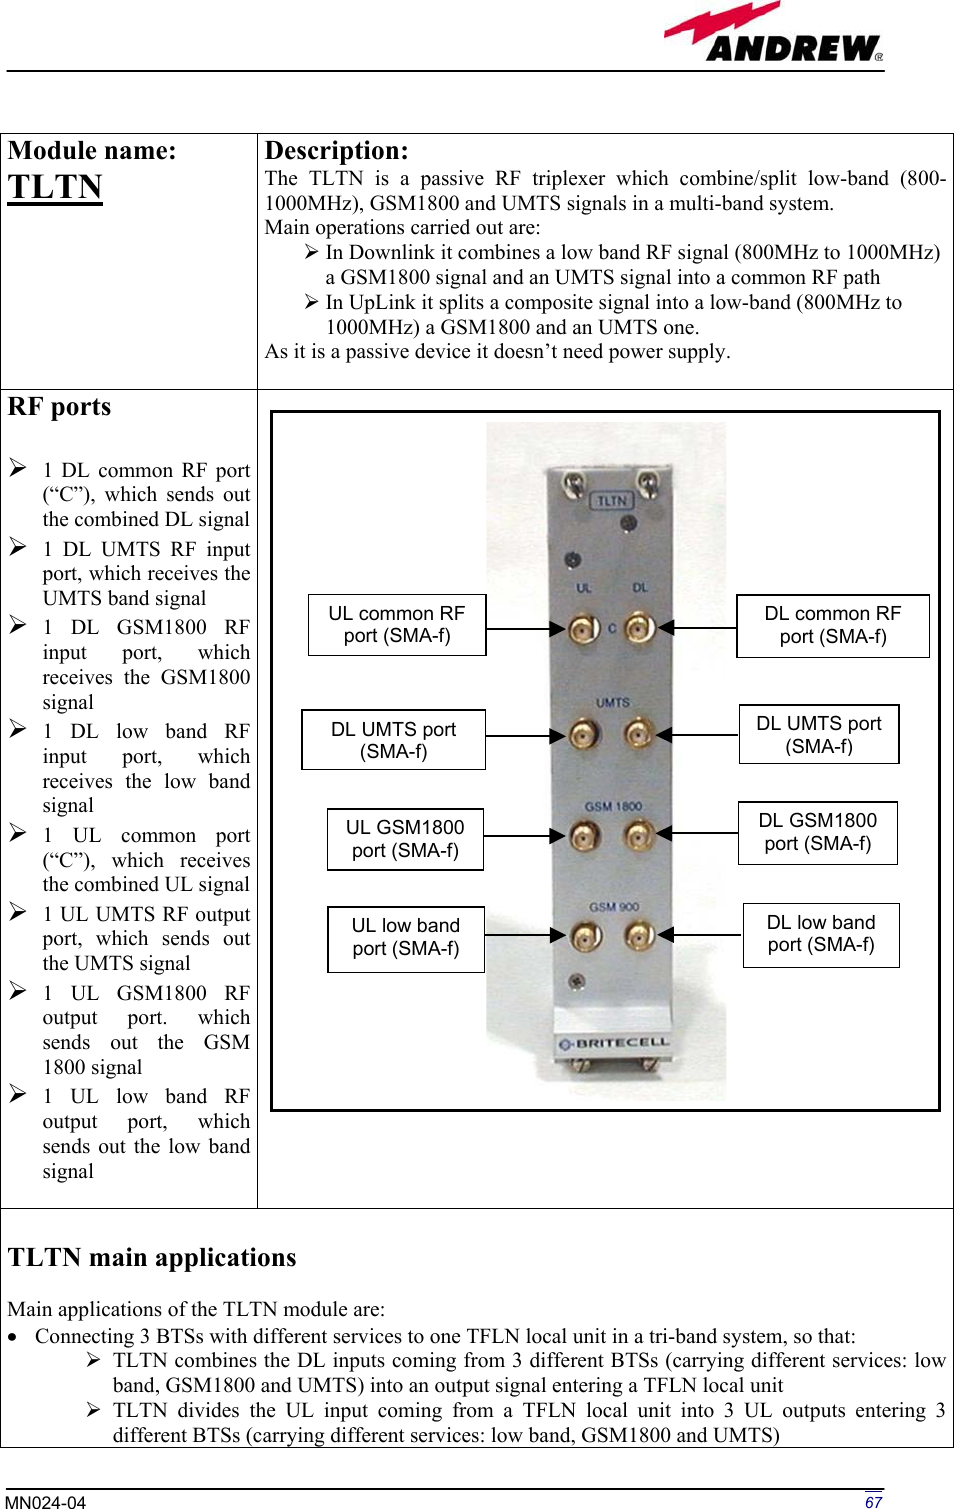 Page 67 of Andrew Wireless Innovations Group BCP-TFAM23 Model TFAM23 Downlink Booster User Manual MN024 04 rev3